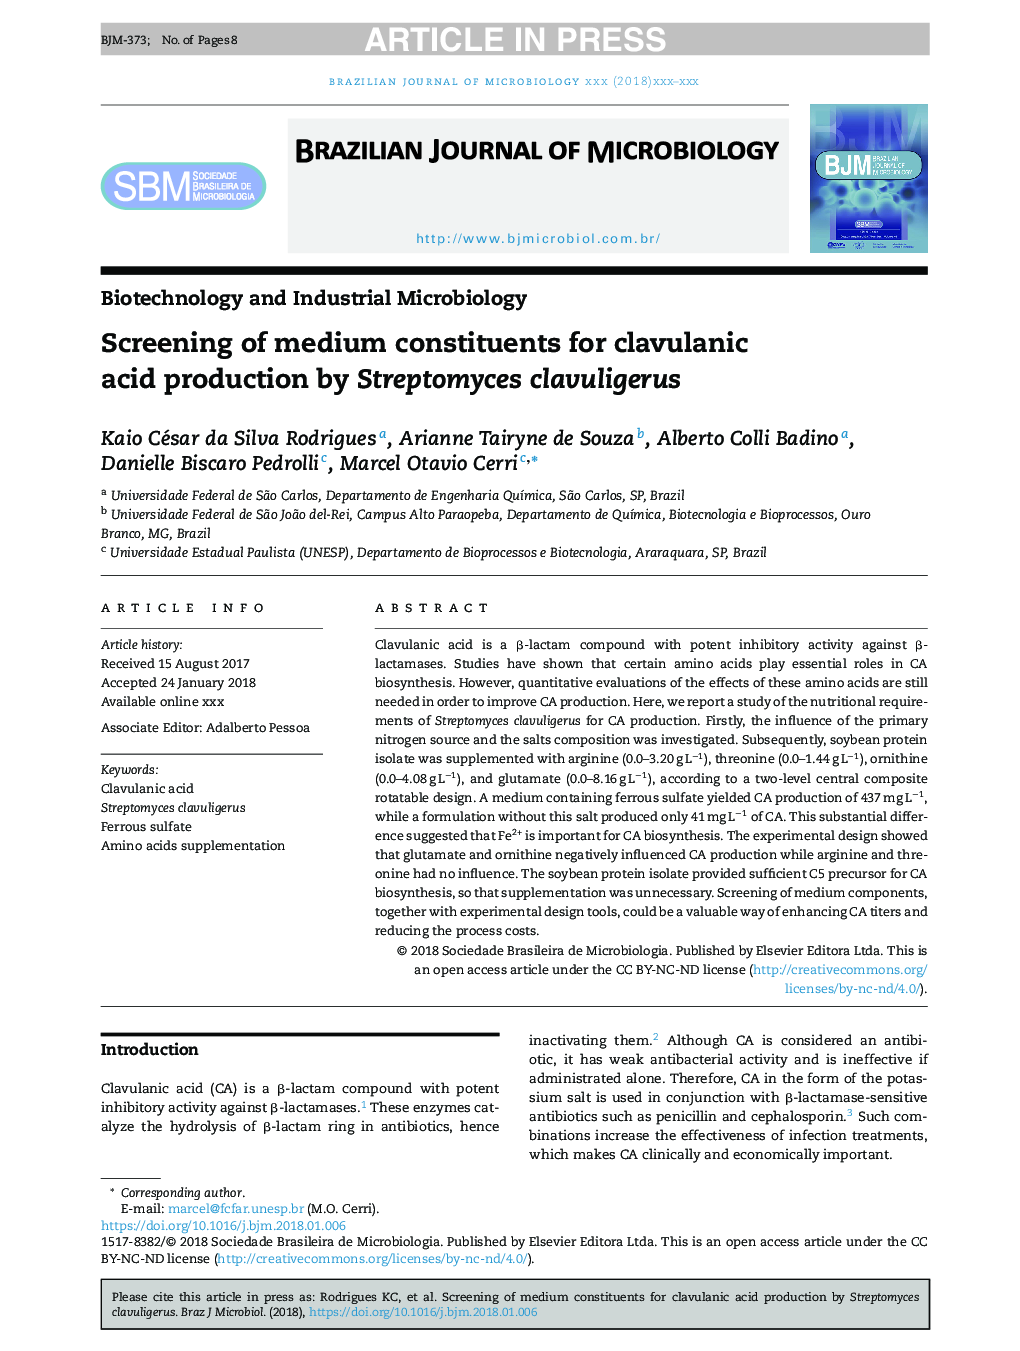 Screening of medium constituents for clavulanic acid production by Streptomyces clavuligerus